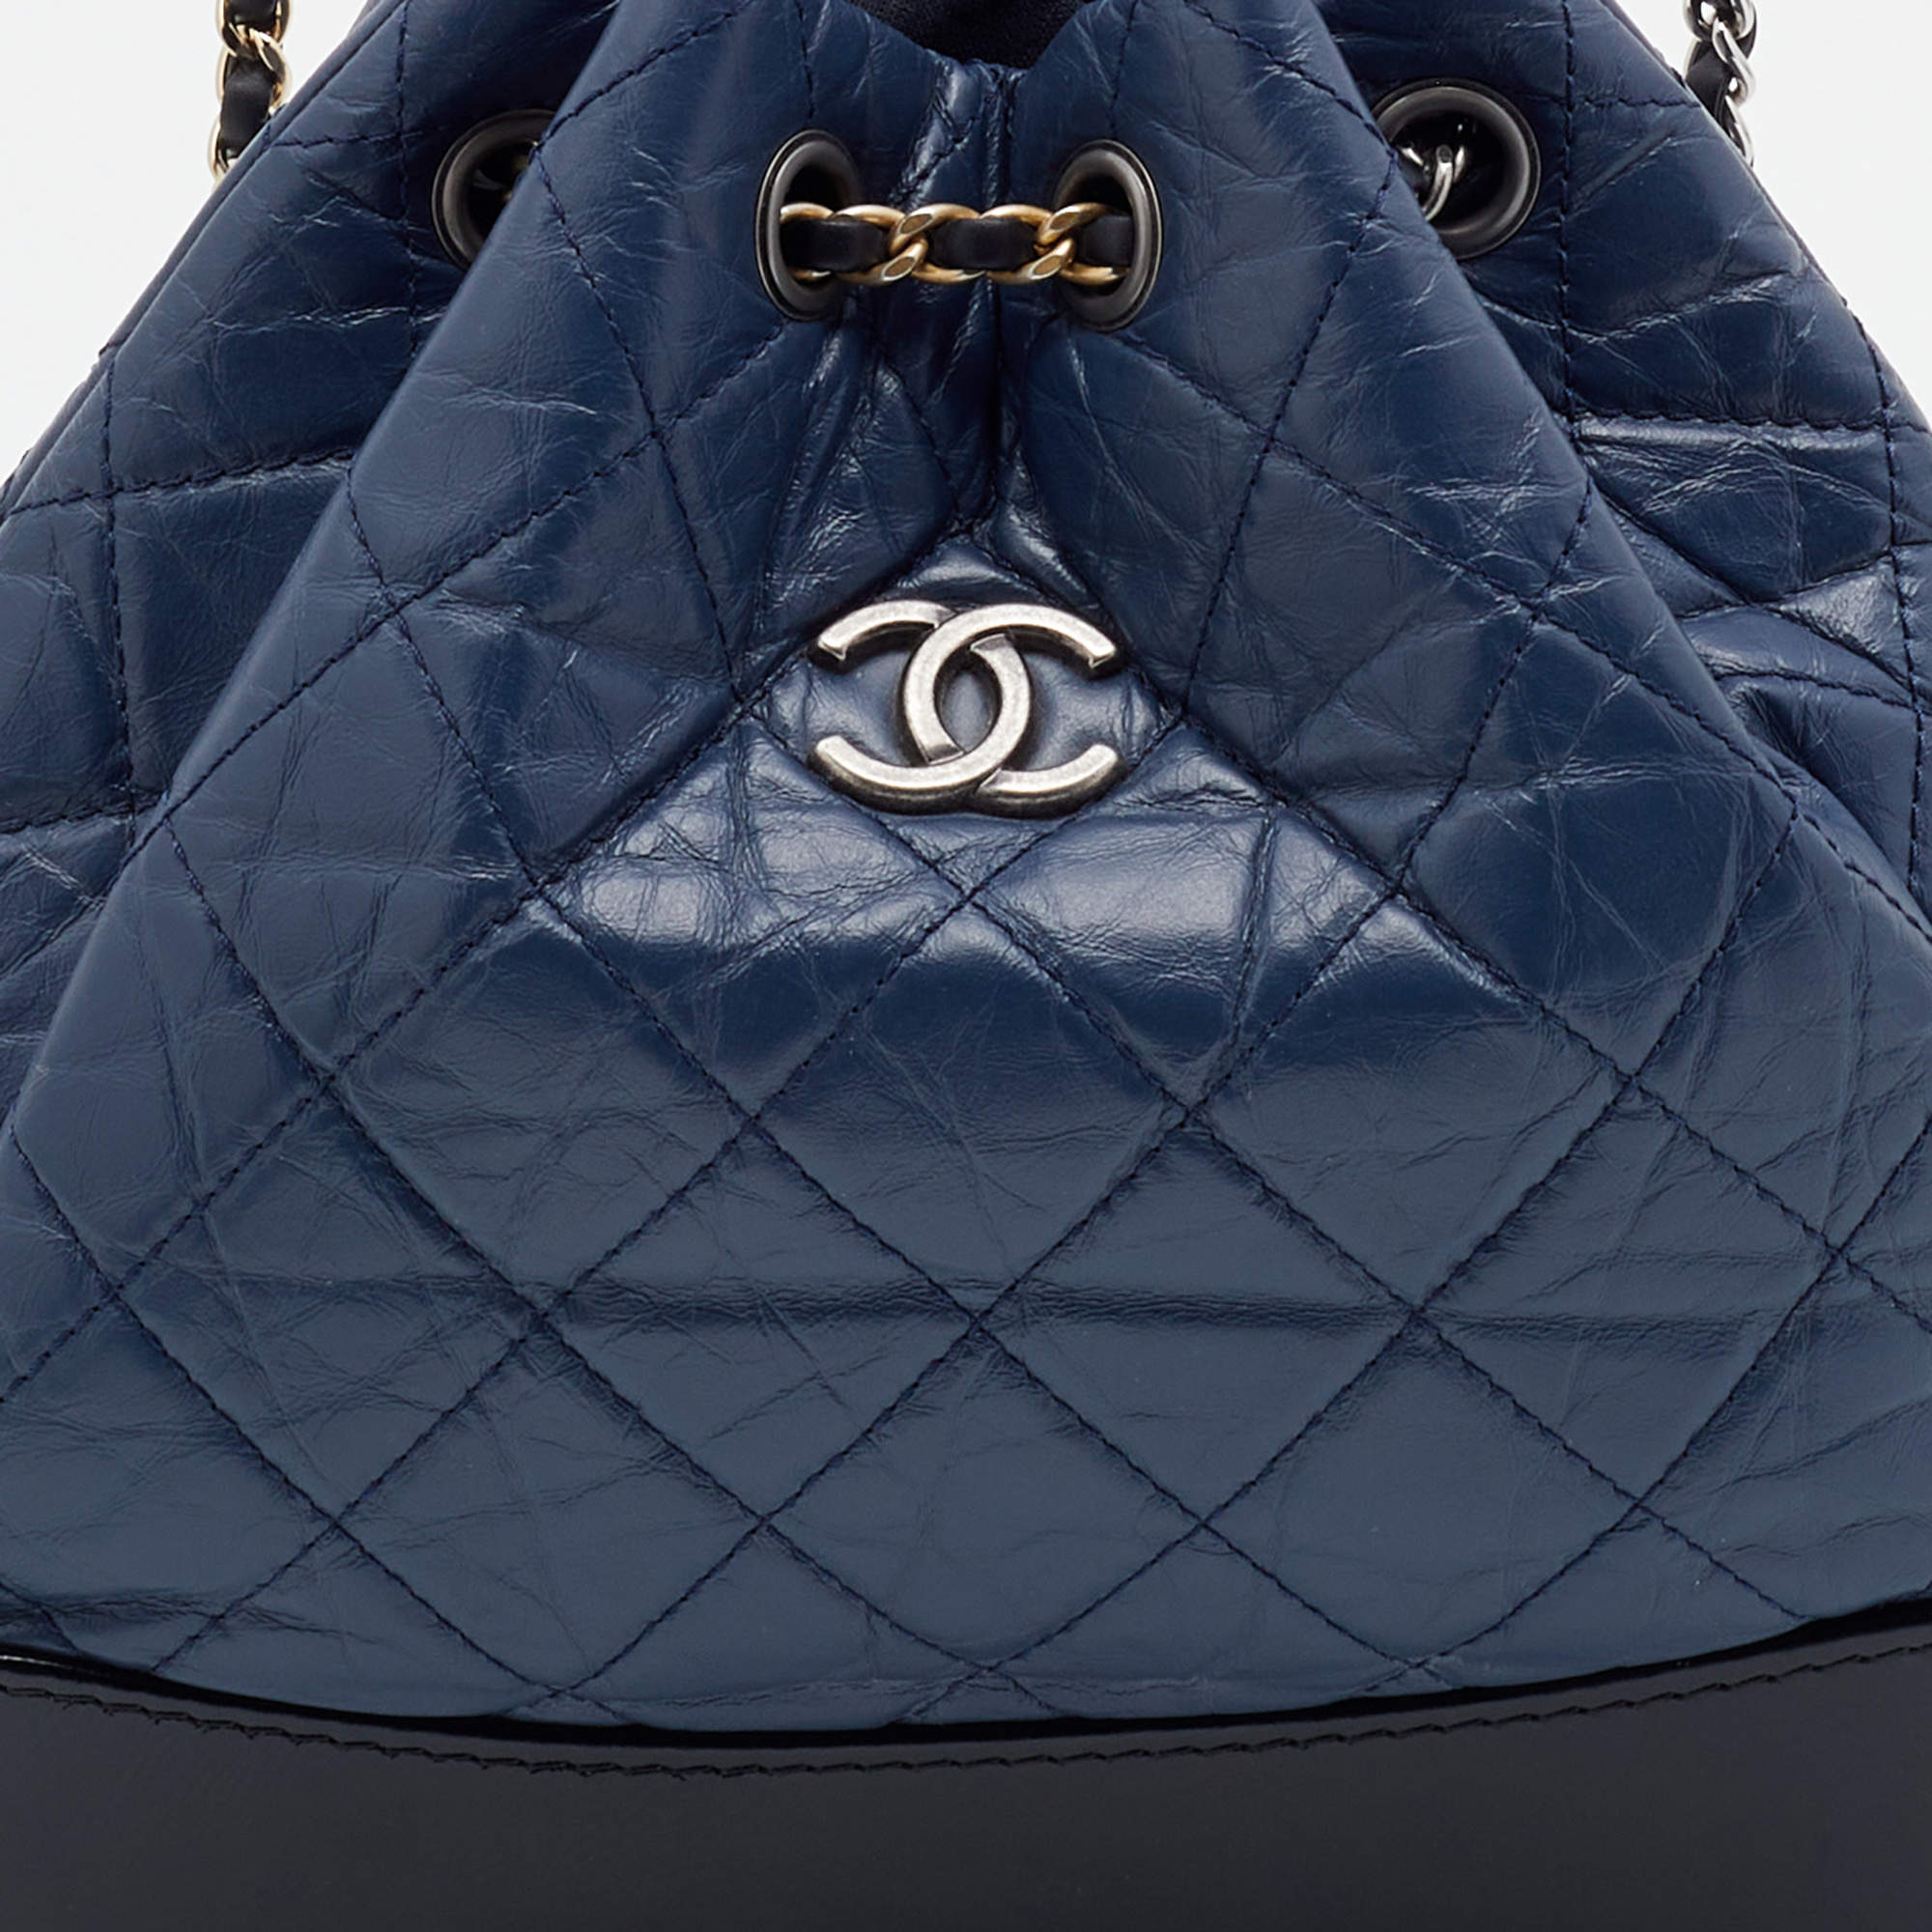 Gabrielle leather crossbody bag Chanel Blue in Leather - 25614568